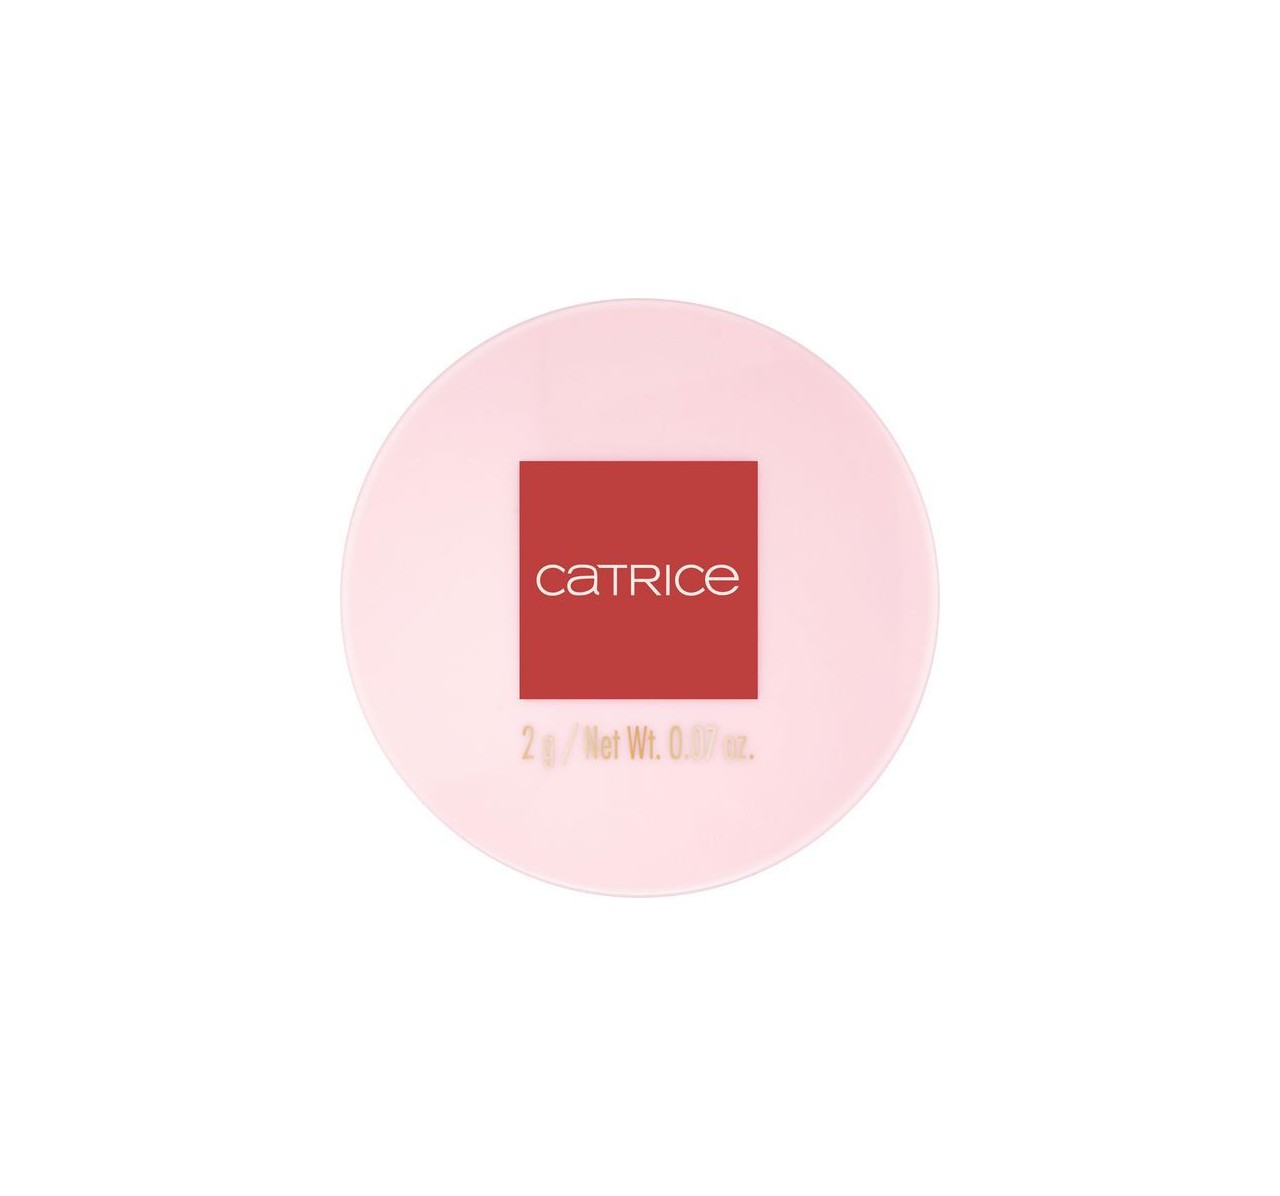 Edition C02 Limited Cream-To-Powder Beautiful.You. Catrice Blush